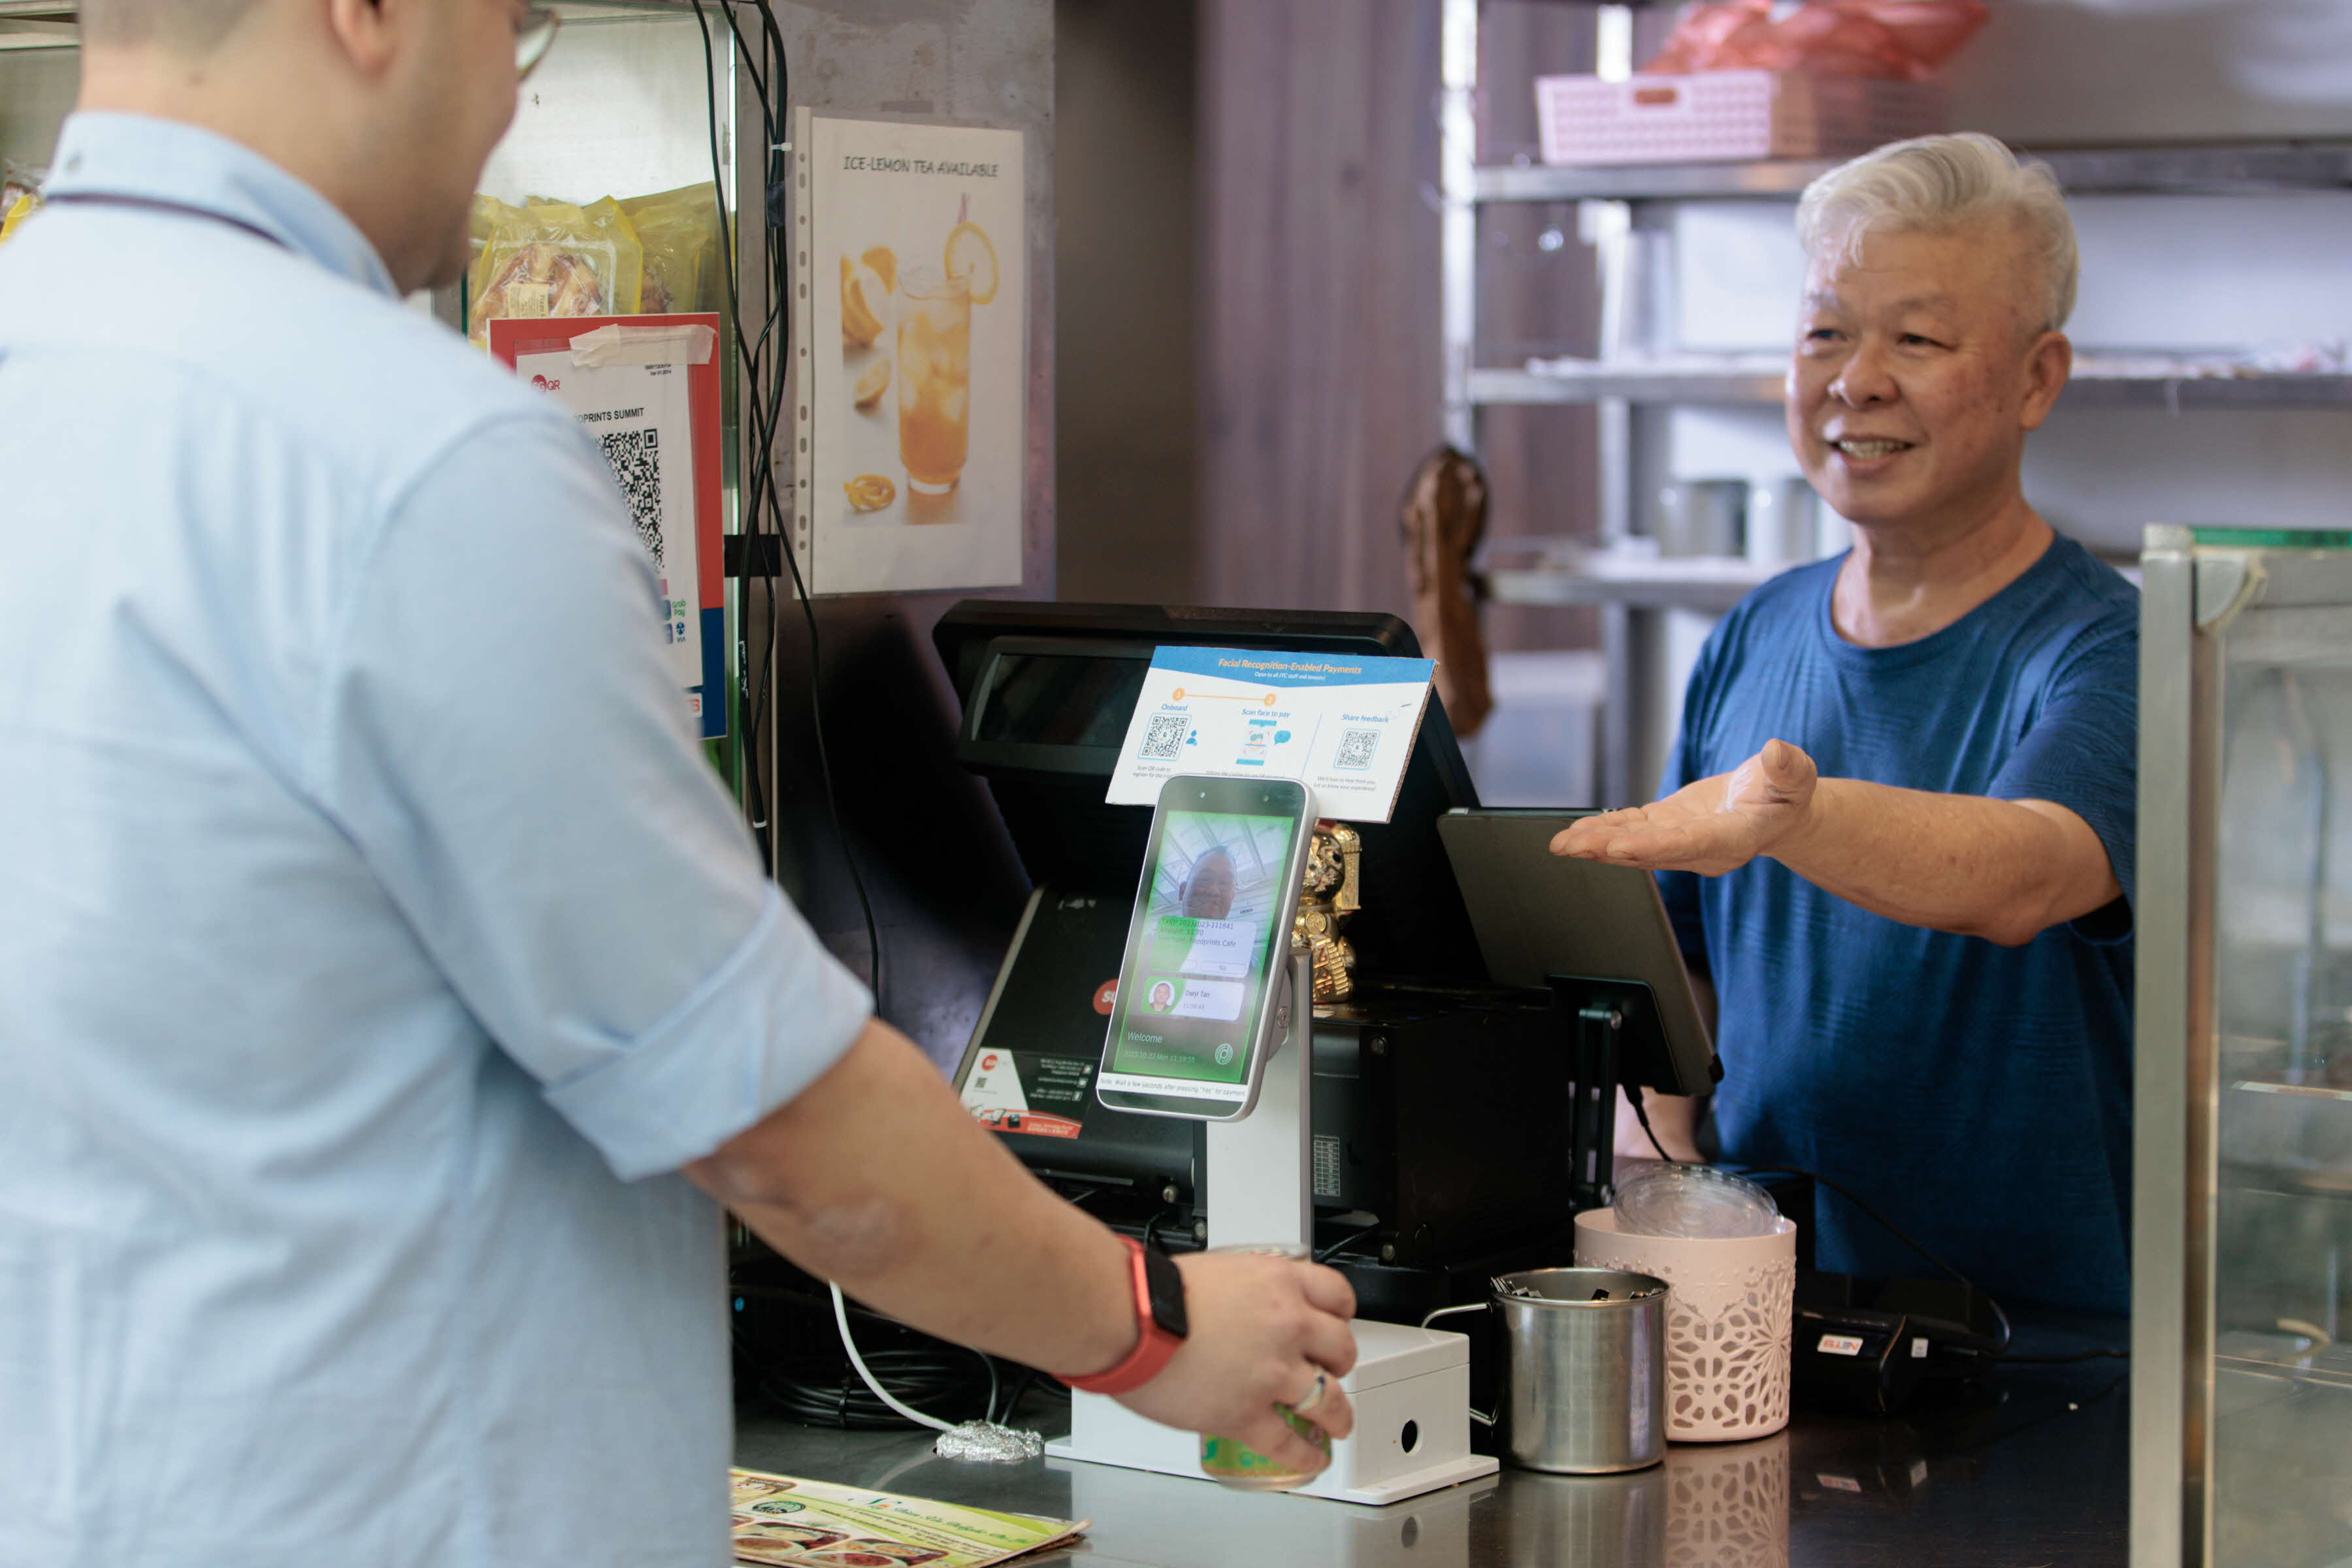 Facial recognition payment enables a seamless and convenient payment process